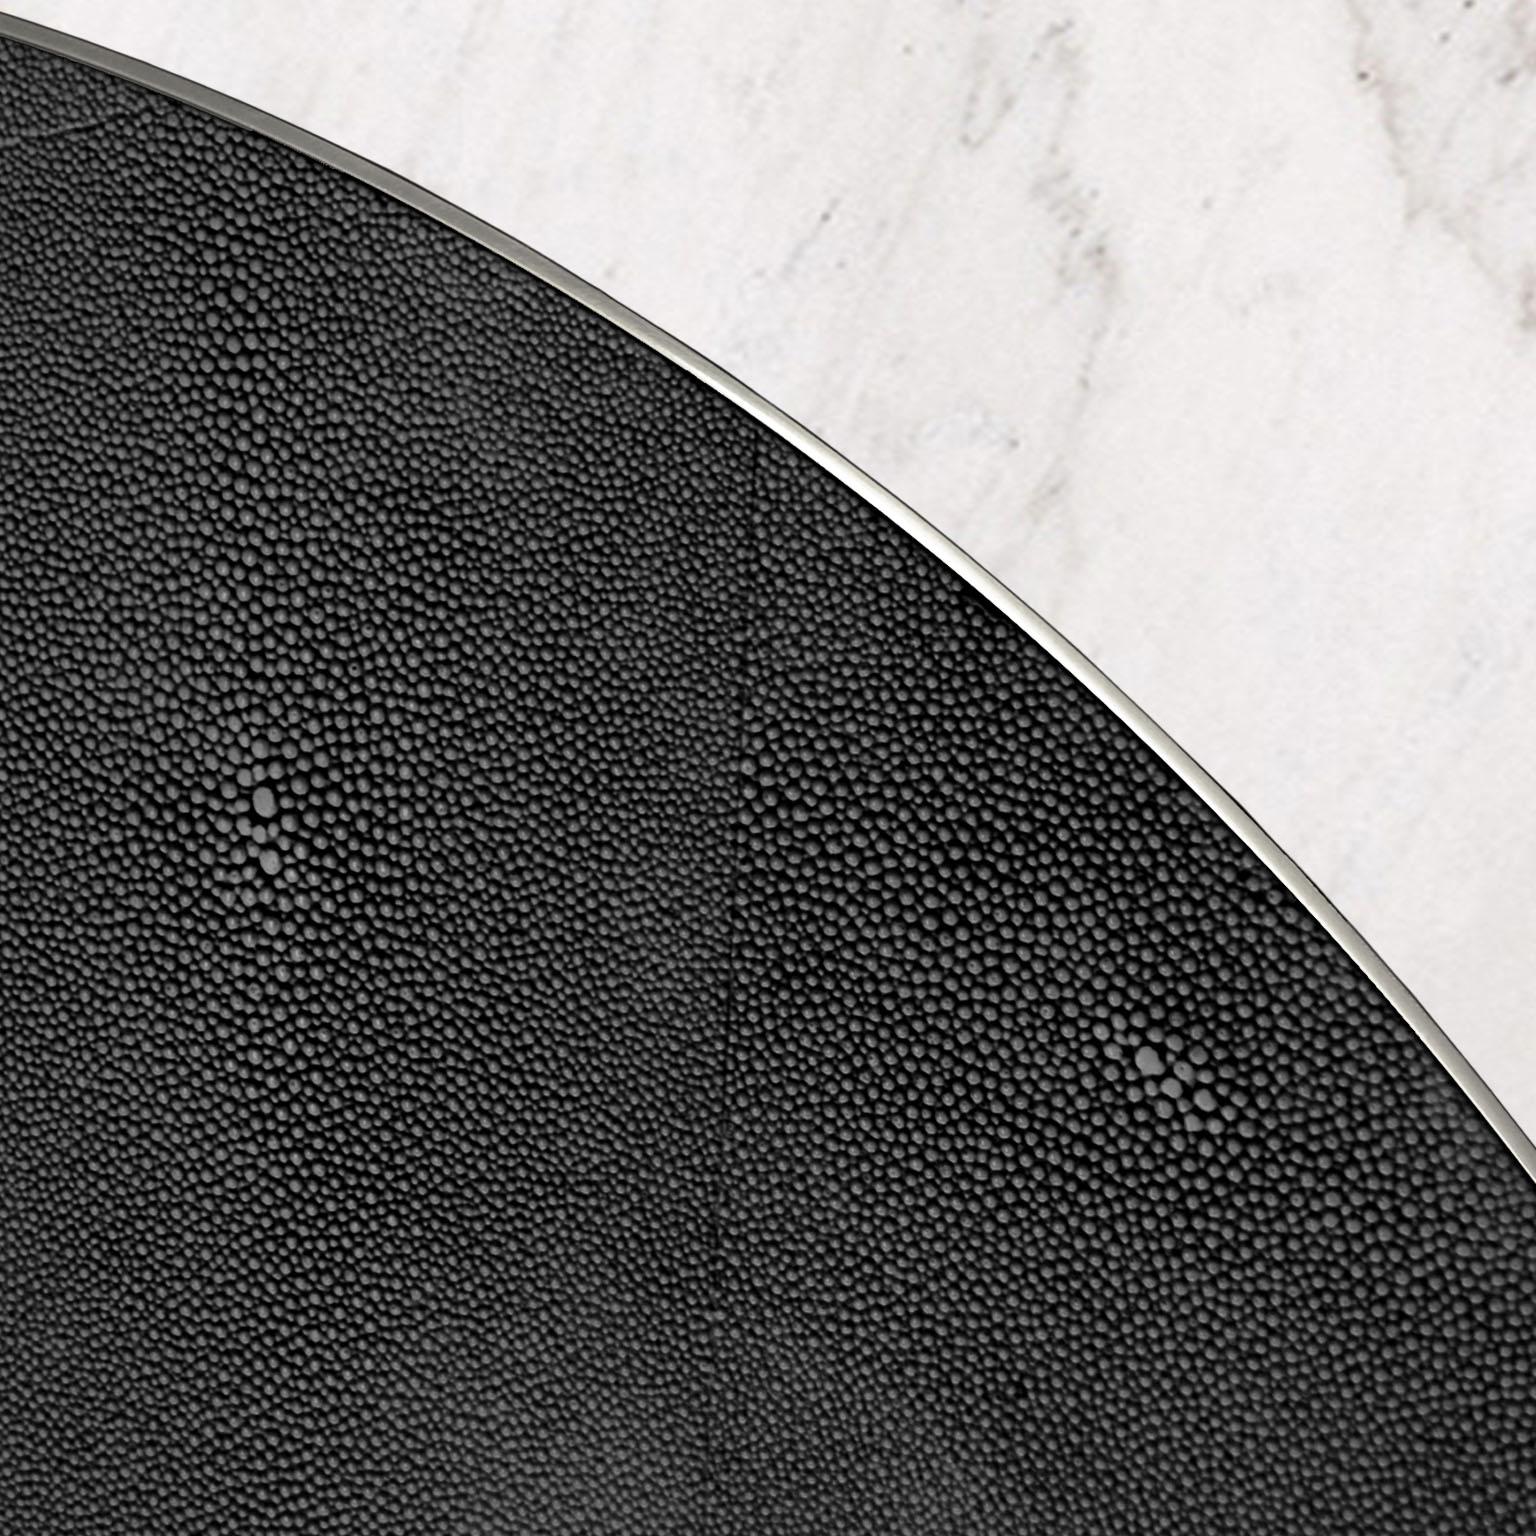 In Aurelio round table the scagliola shagreen meets the elegance of the White marble and the refined accents of the polished brass.
The purpose is to show to our valued customers a new concept of the scagliola art technique where the scagliola meets